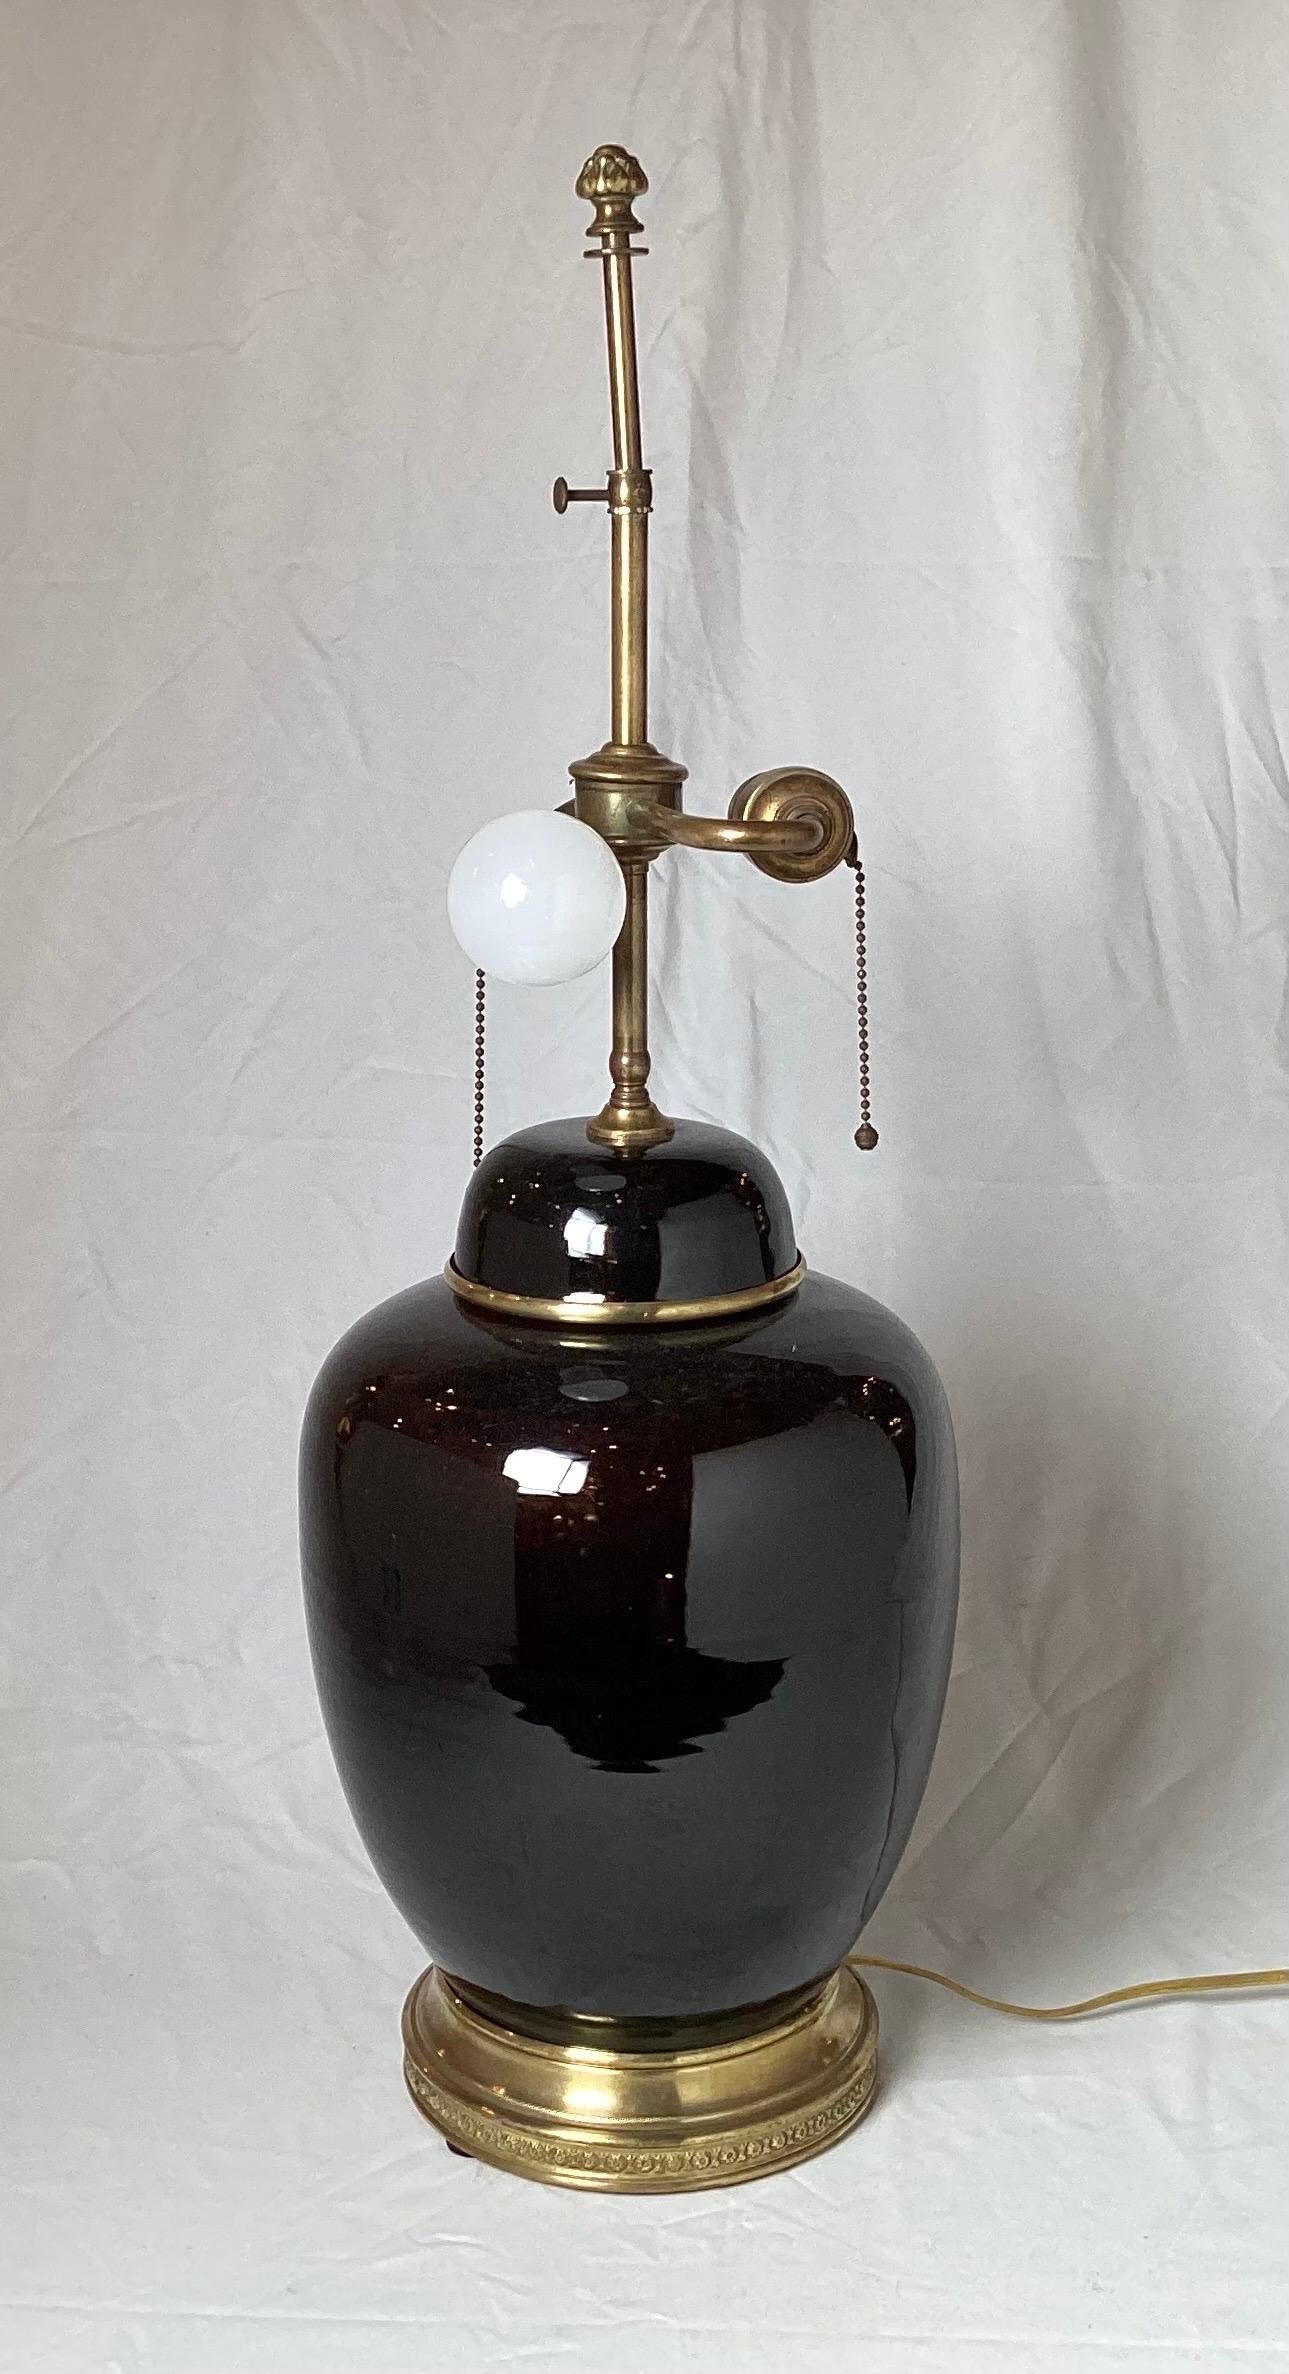 A stunning antique Chinese porcelain 19th century jar, as a lamp. The porcelain jar is in a Mirror black glaze, which is a very dark The Lamp measures 27 inches to the top of the shade, the porcelain jar measures 9.5 inches in diameter, and 8 inches